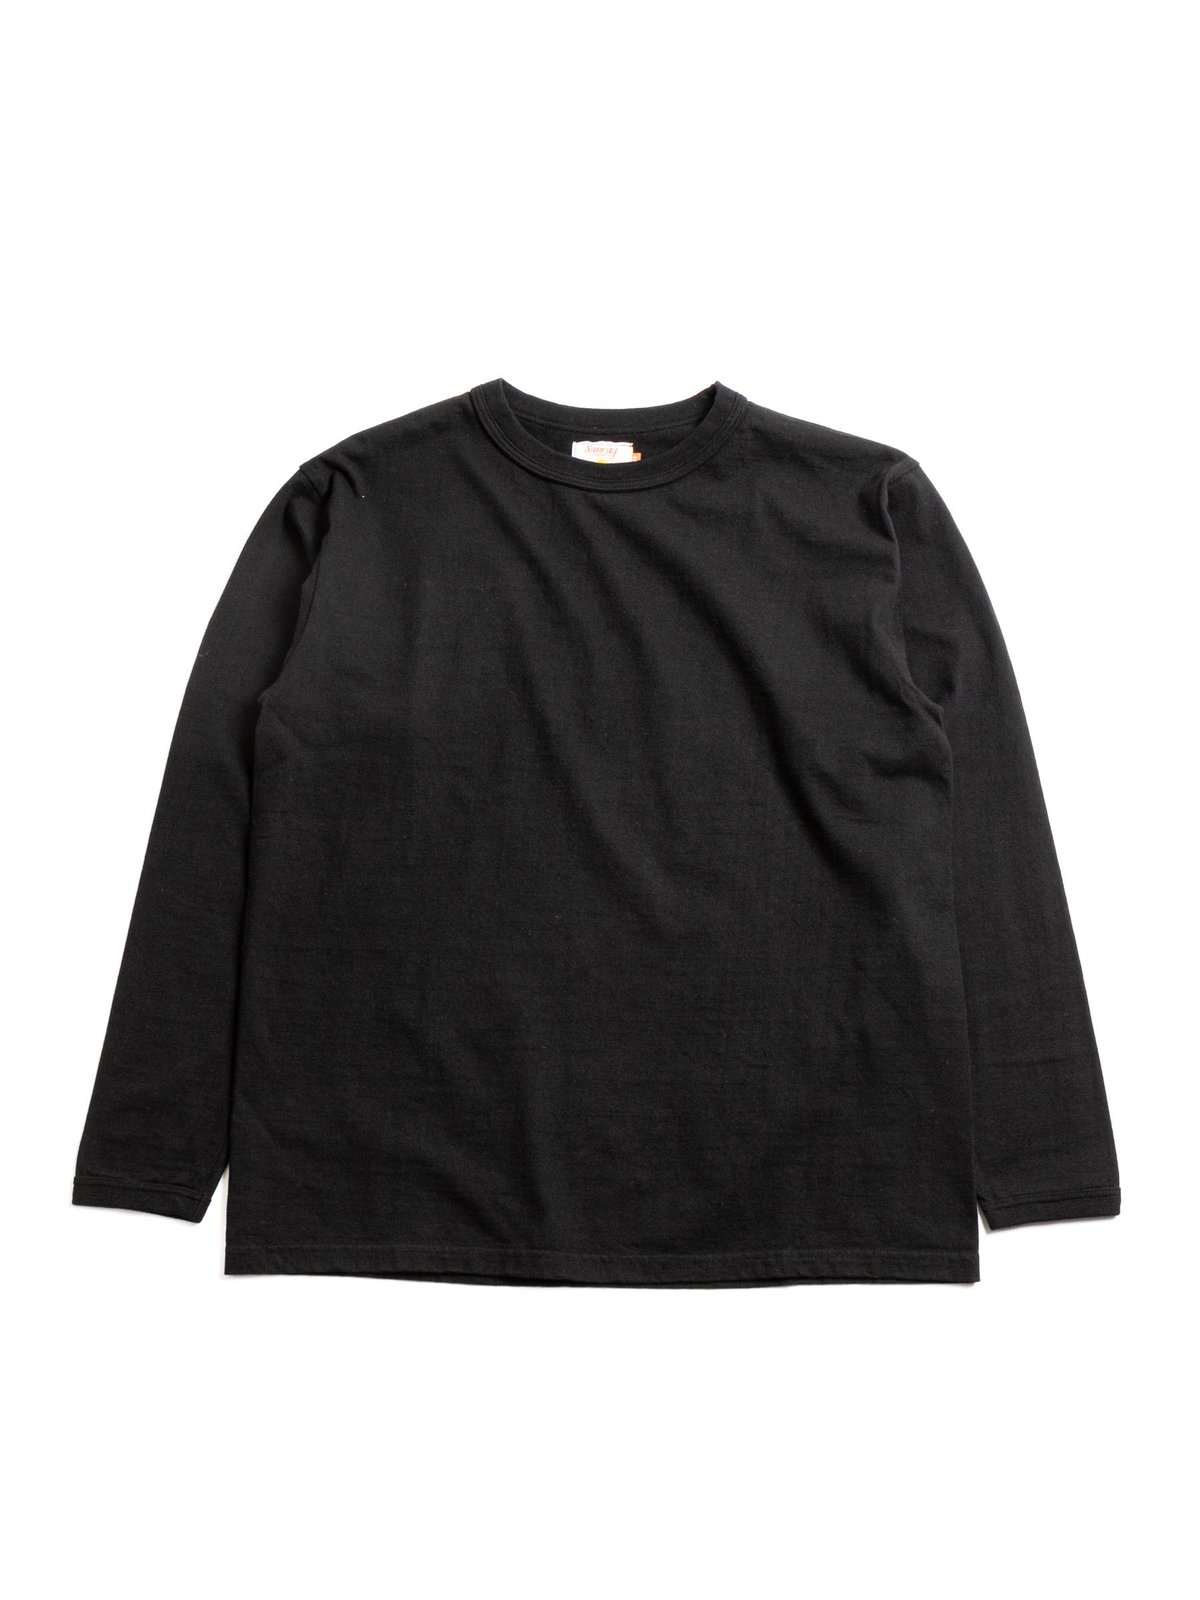 MAKAHA L/S T SHIRT ANTHRACITE - Image 1